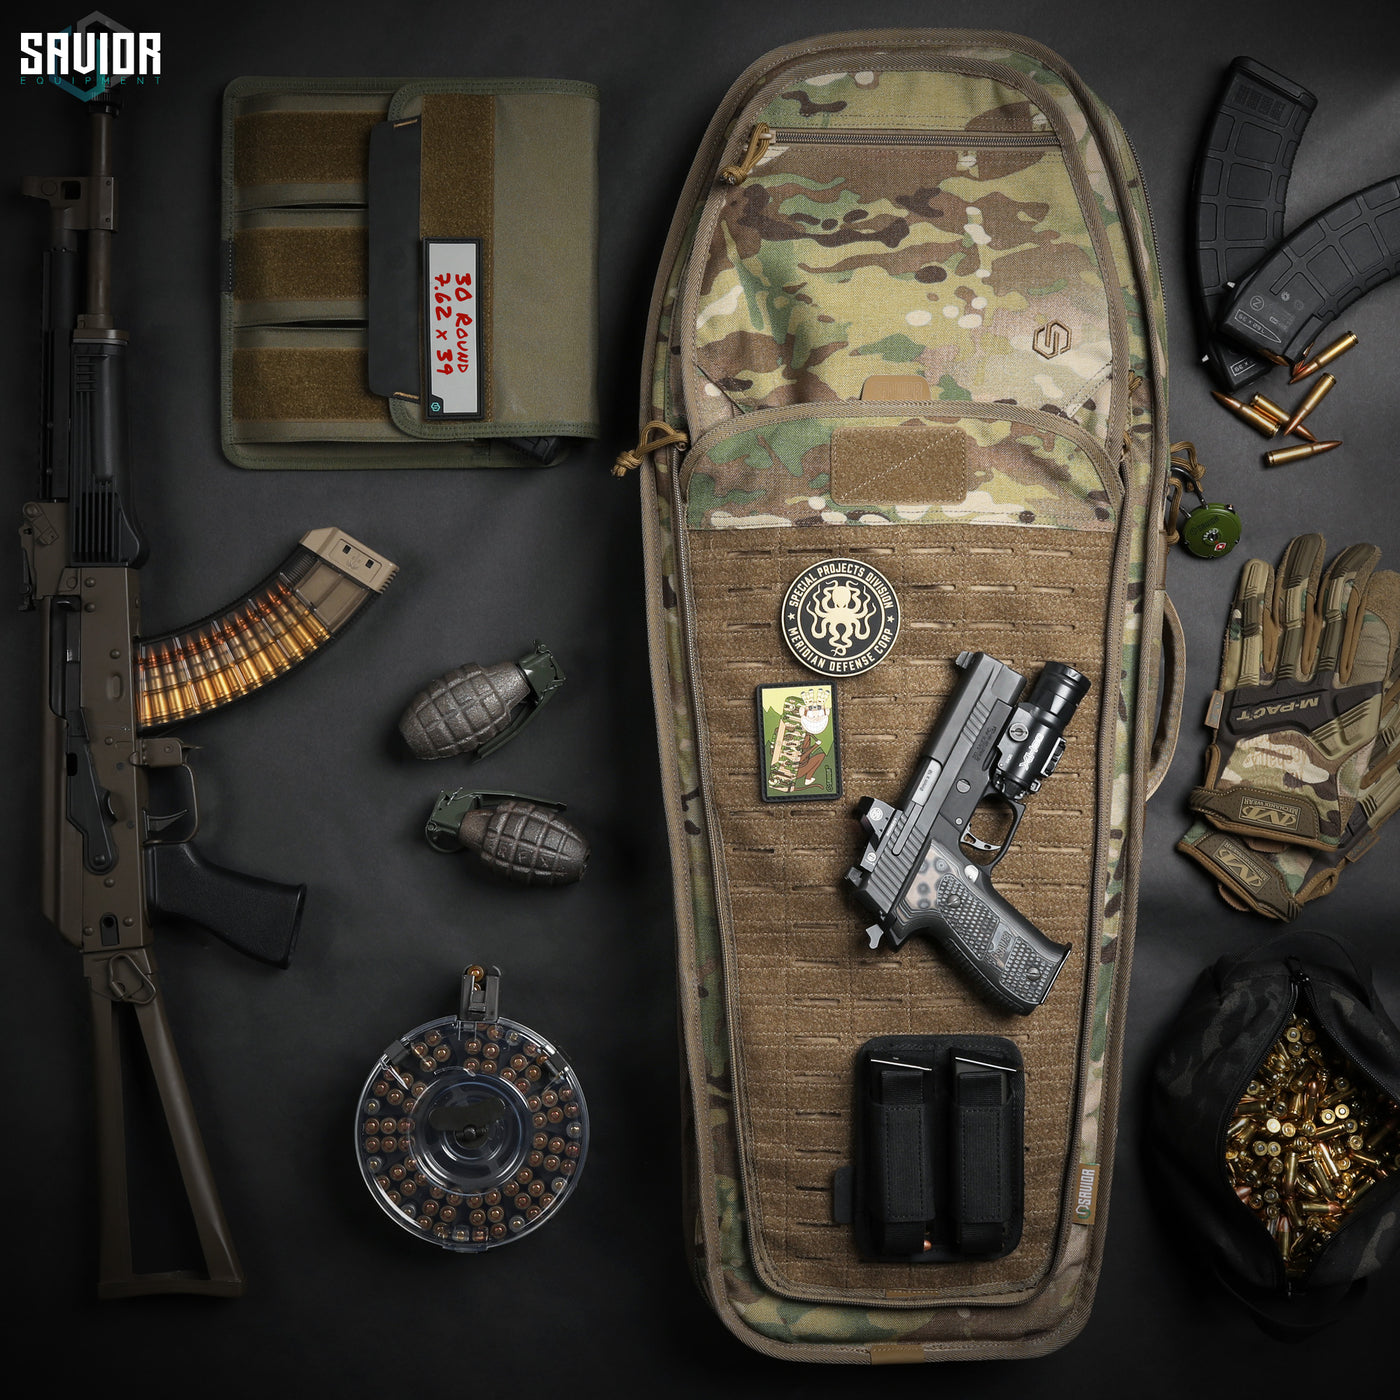 Two-Faced Front - Beneath the original coffin front cover reveals an alternative tactical cover that provides instant access to essentials at a moments notice. Firearms & accessories shown not included.